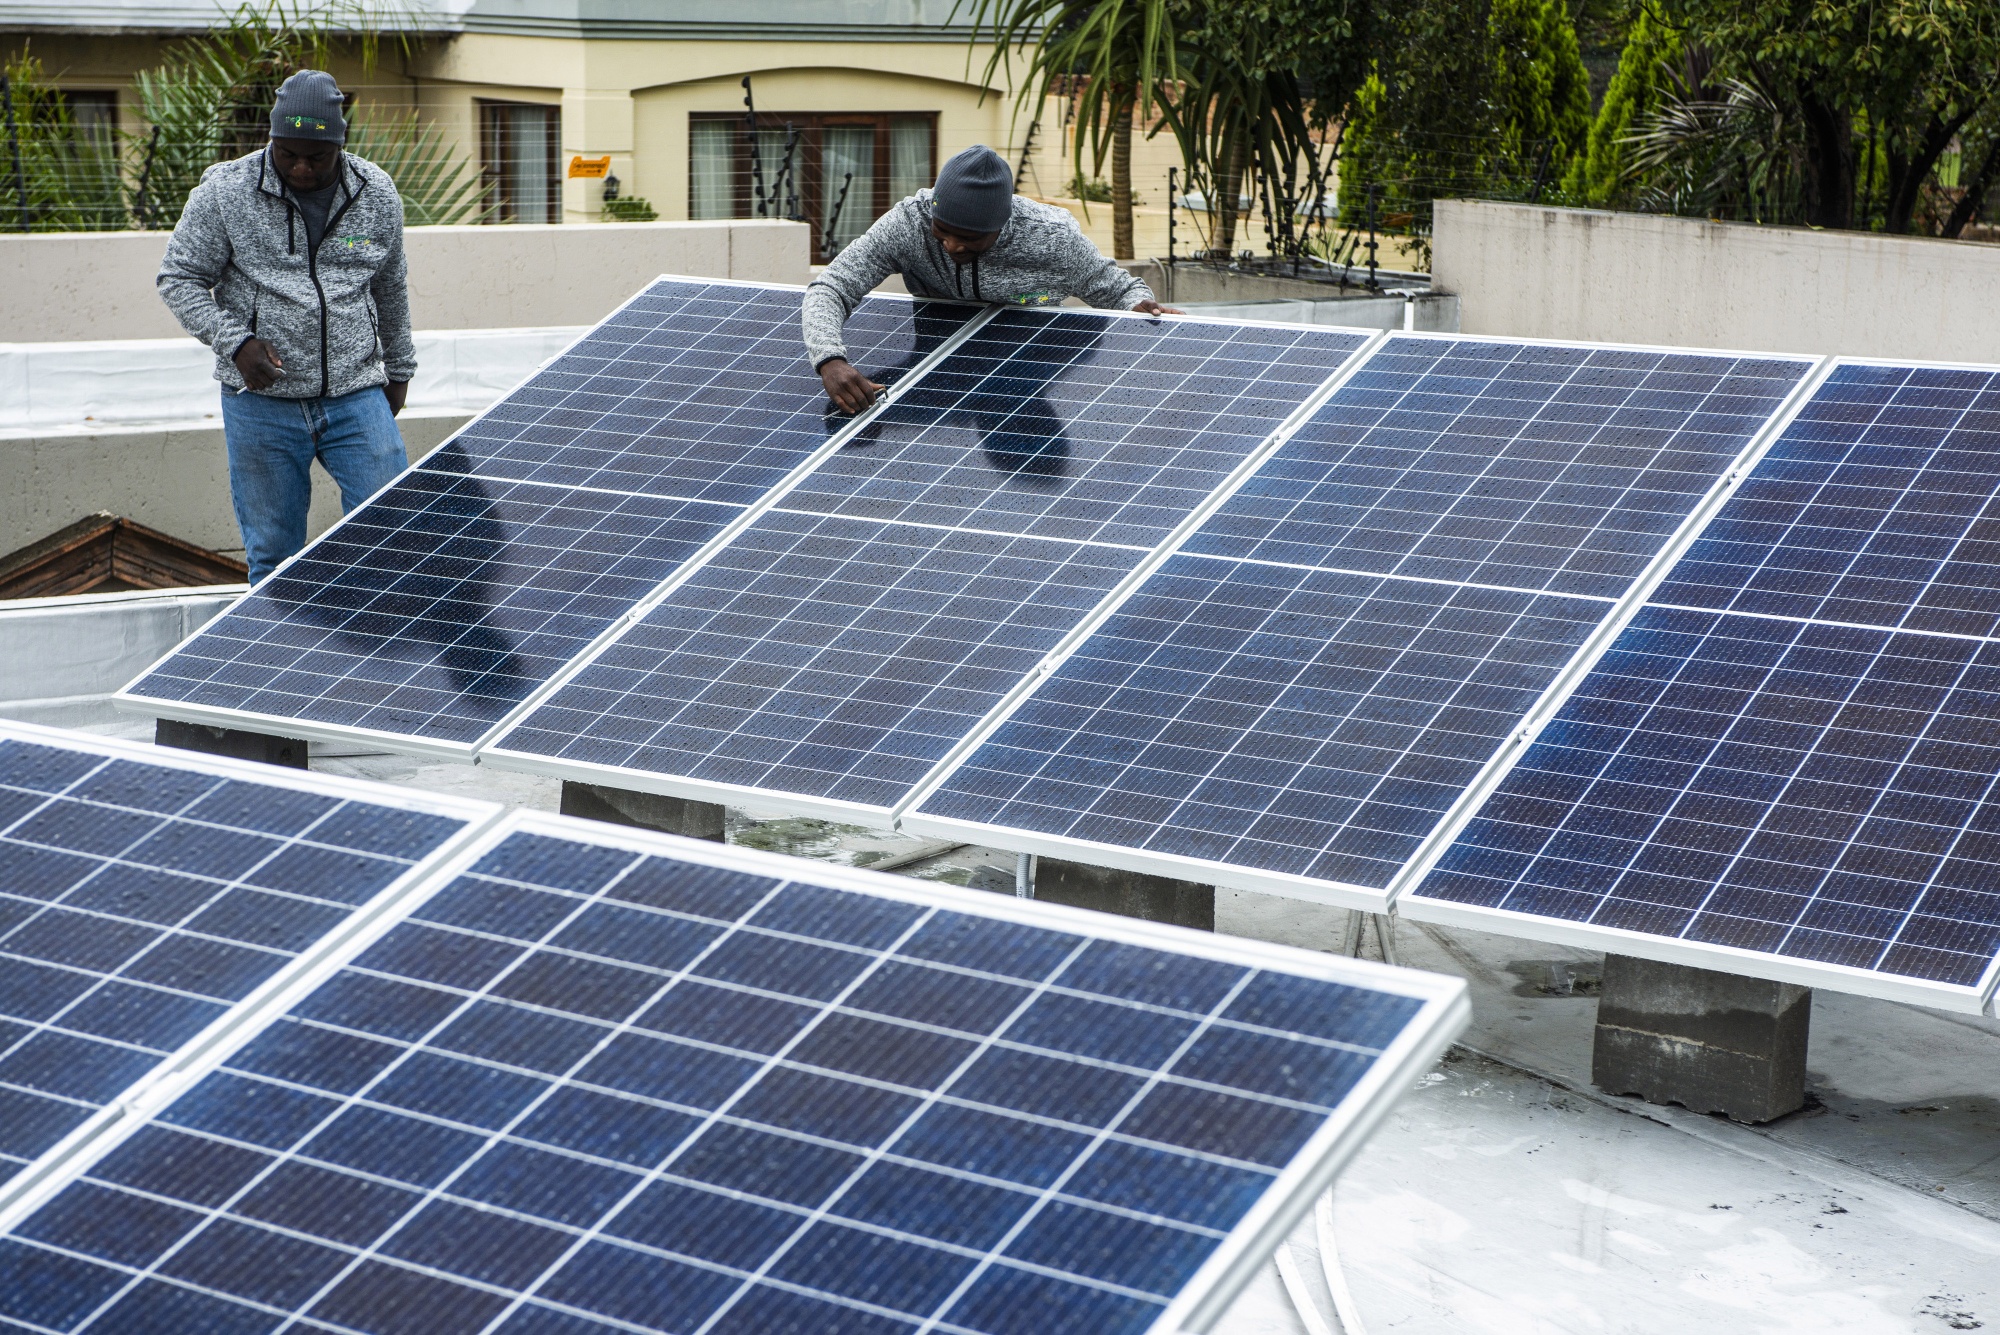 Workers install solar panels onto the roof of a residential property in Johannesburg.